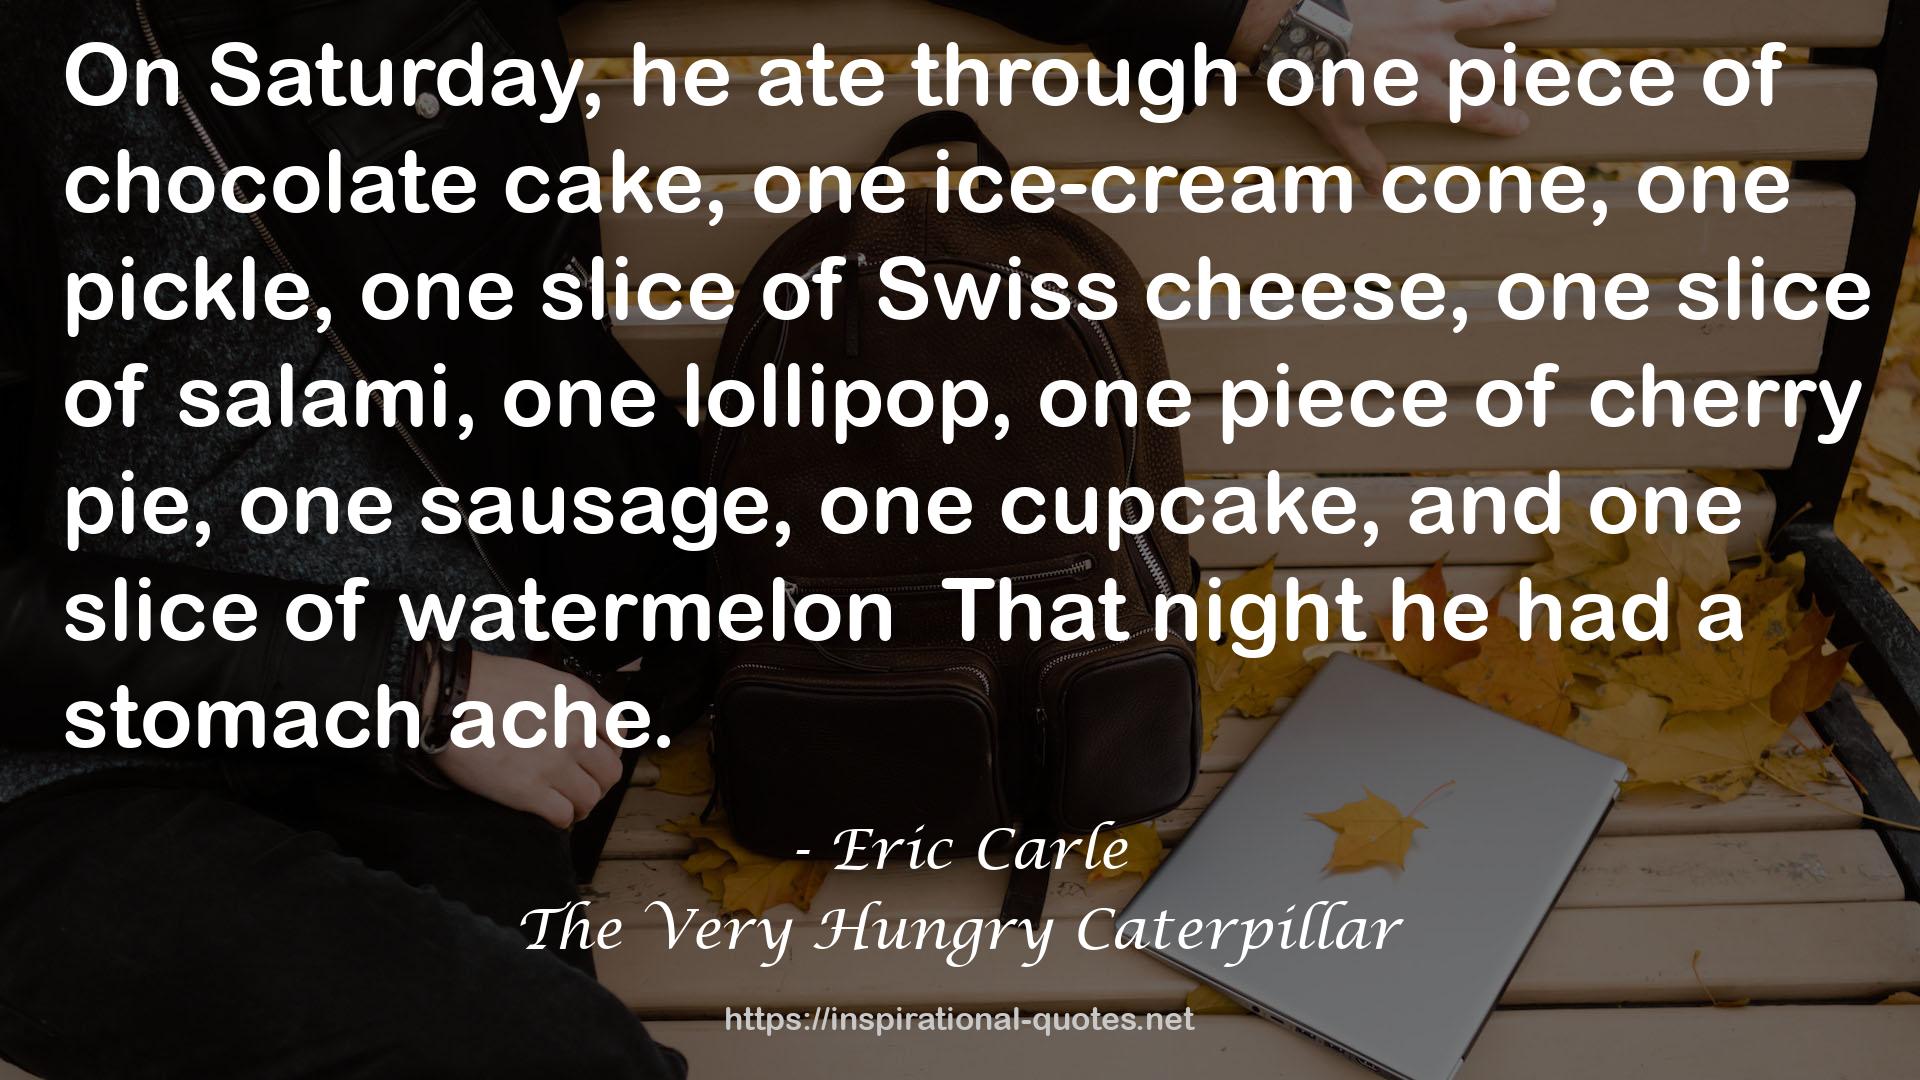 The Very Hungry Caterpillar QUOTES